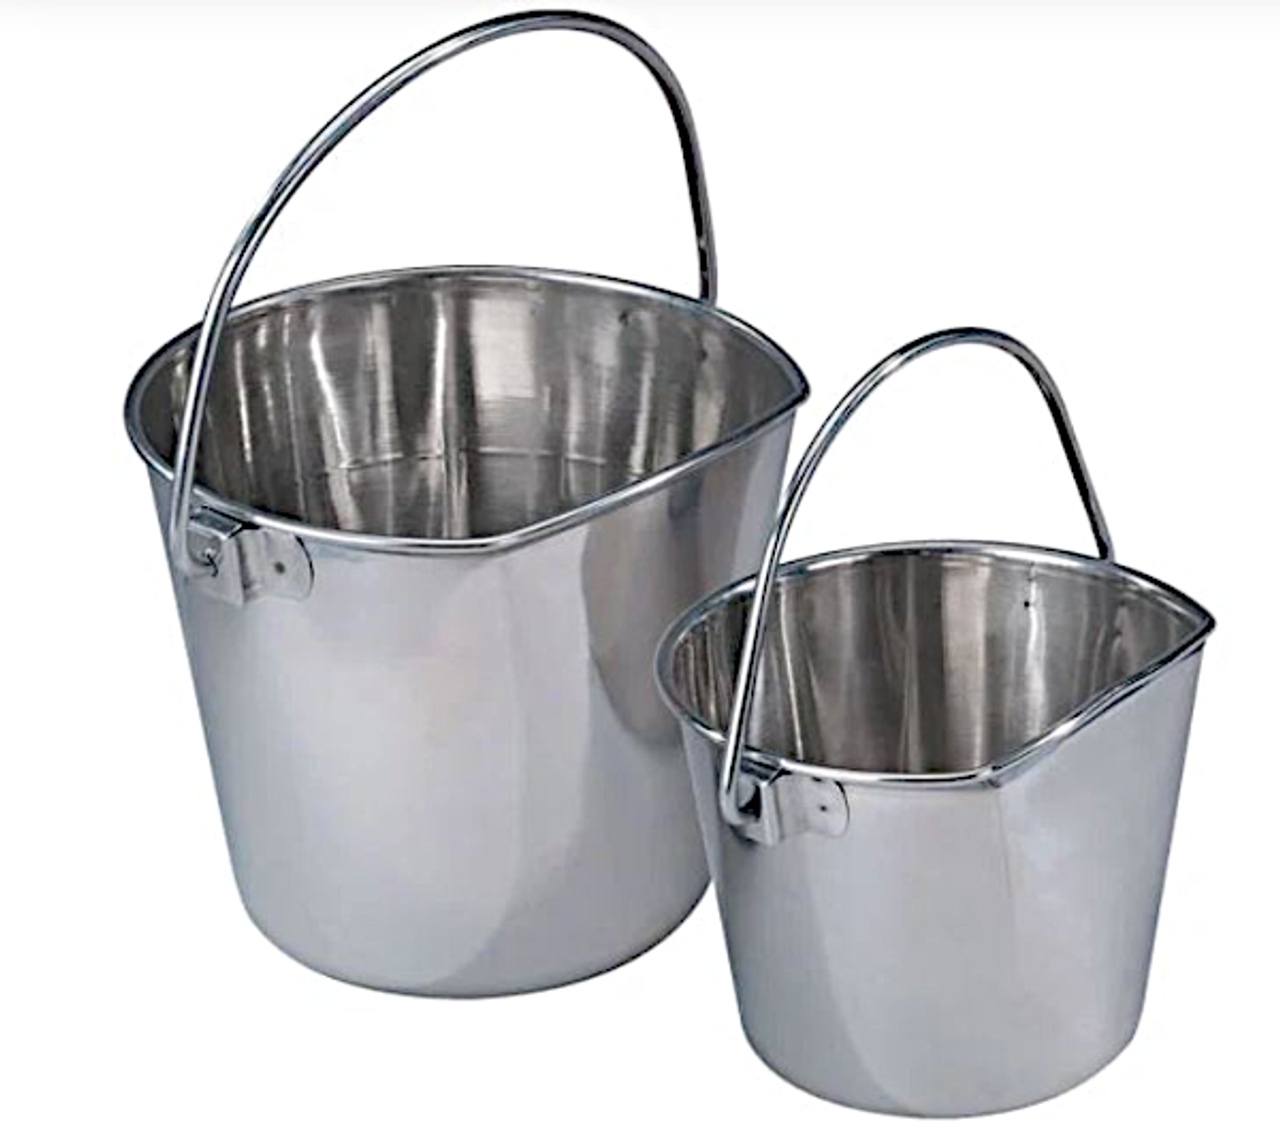 proselect stainless steel buckets in 1 quart, 2 quart, 4 quart, and 6 quart at okie dog supply